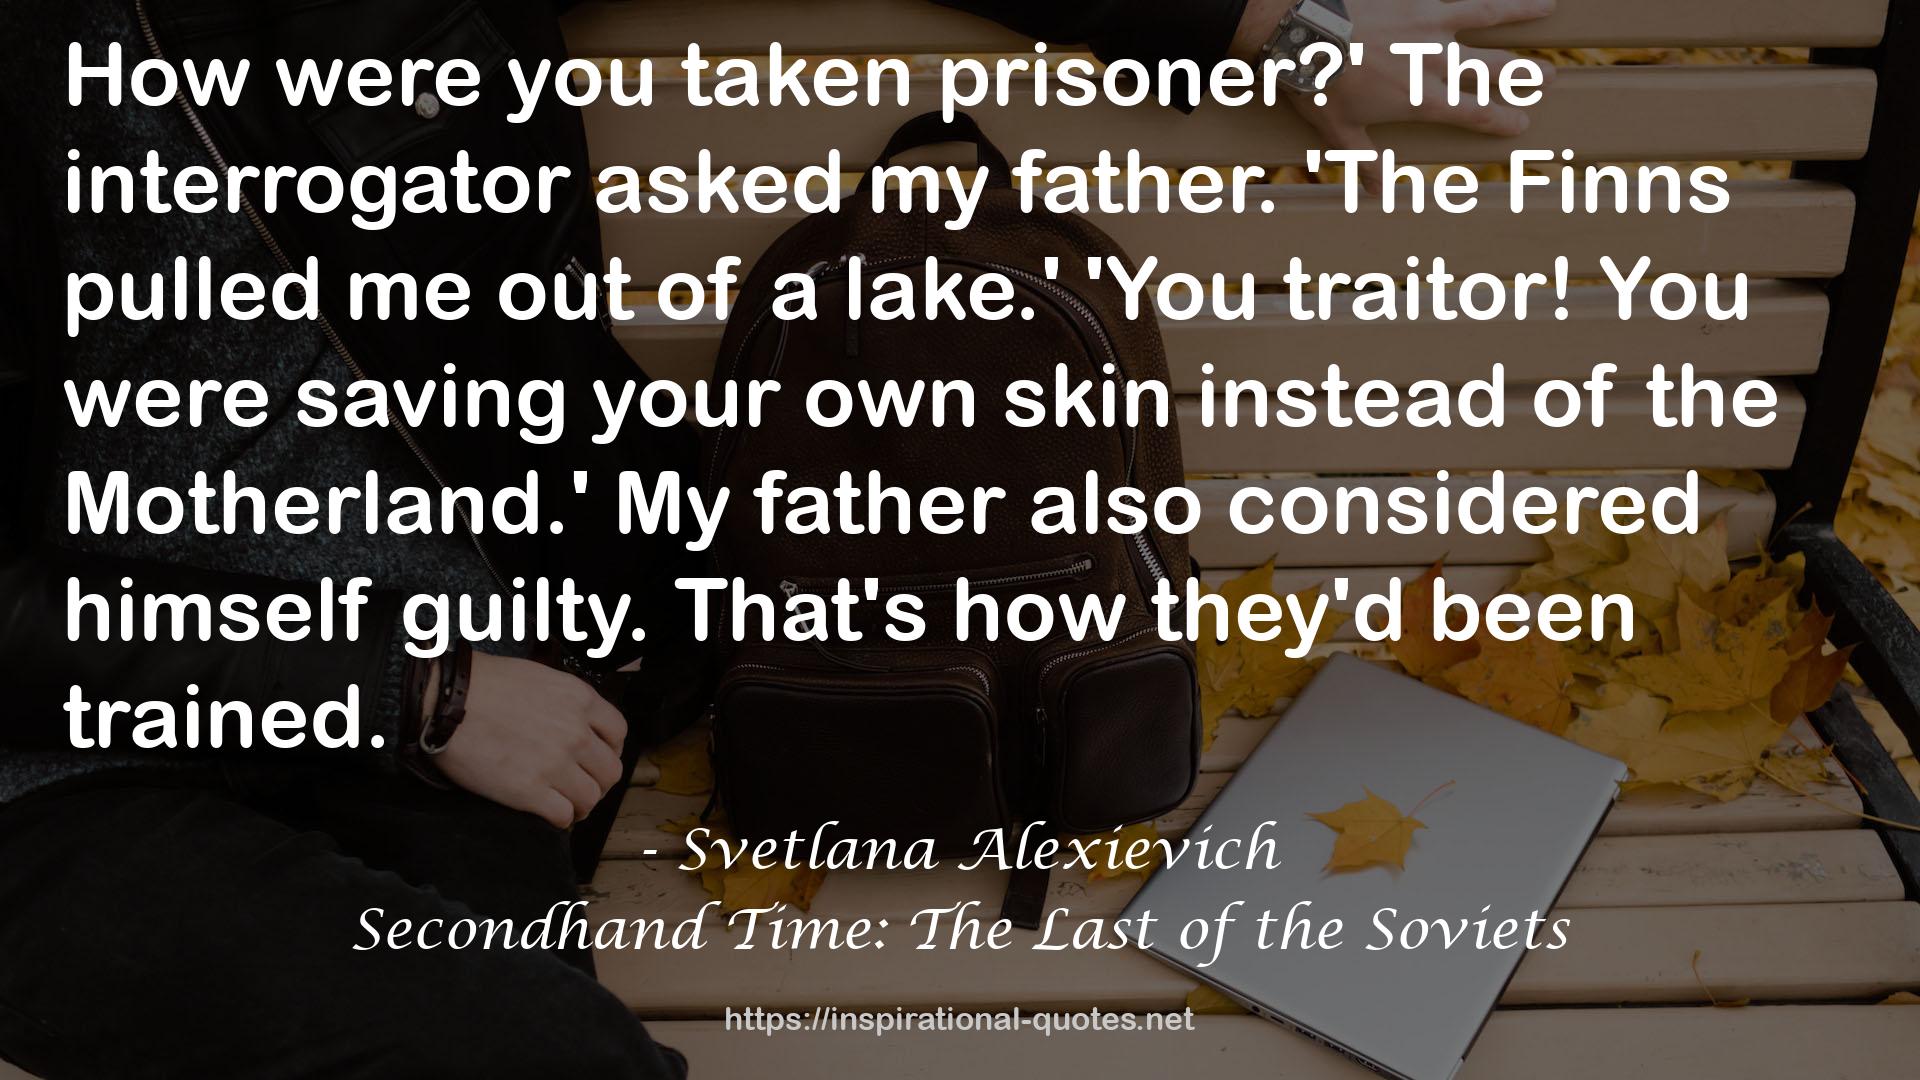 Secondhand Time: The Last of the Soviets QUOTES